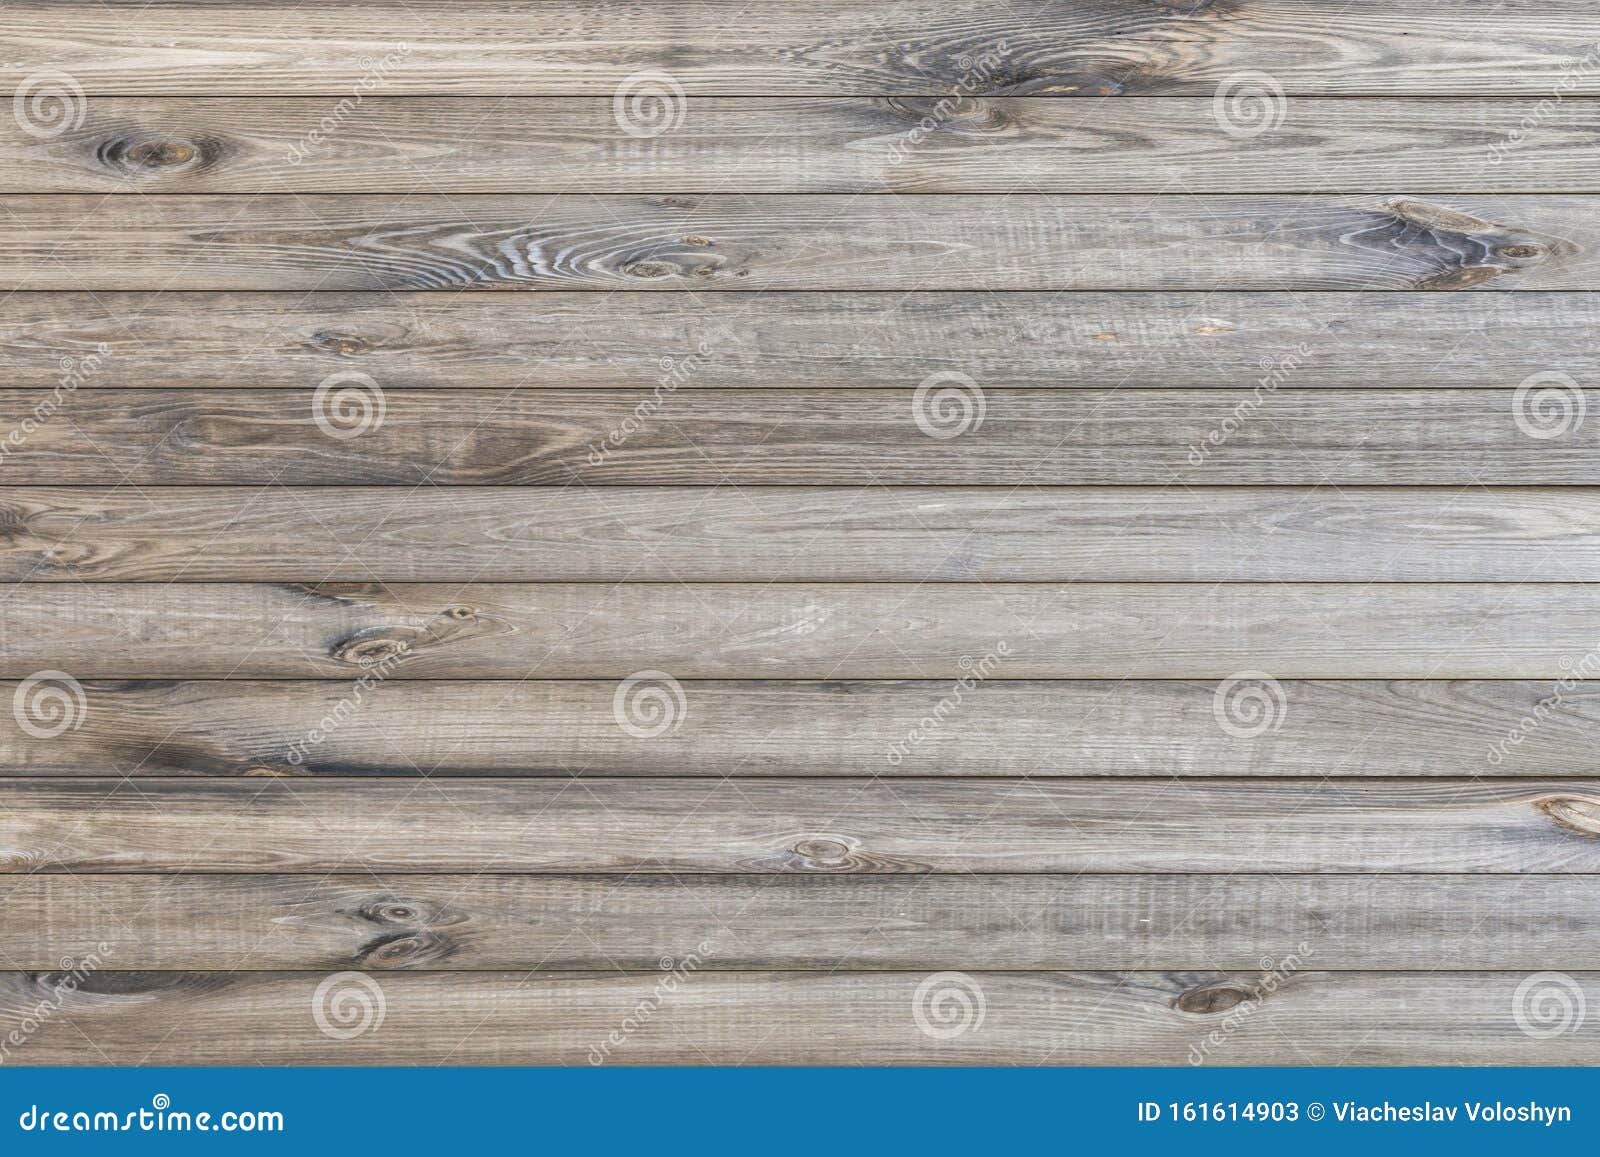 horizontal wood texture background surface with natural pattern. rustic wooden table top view